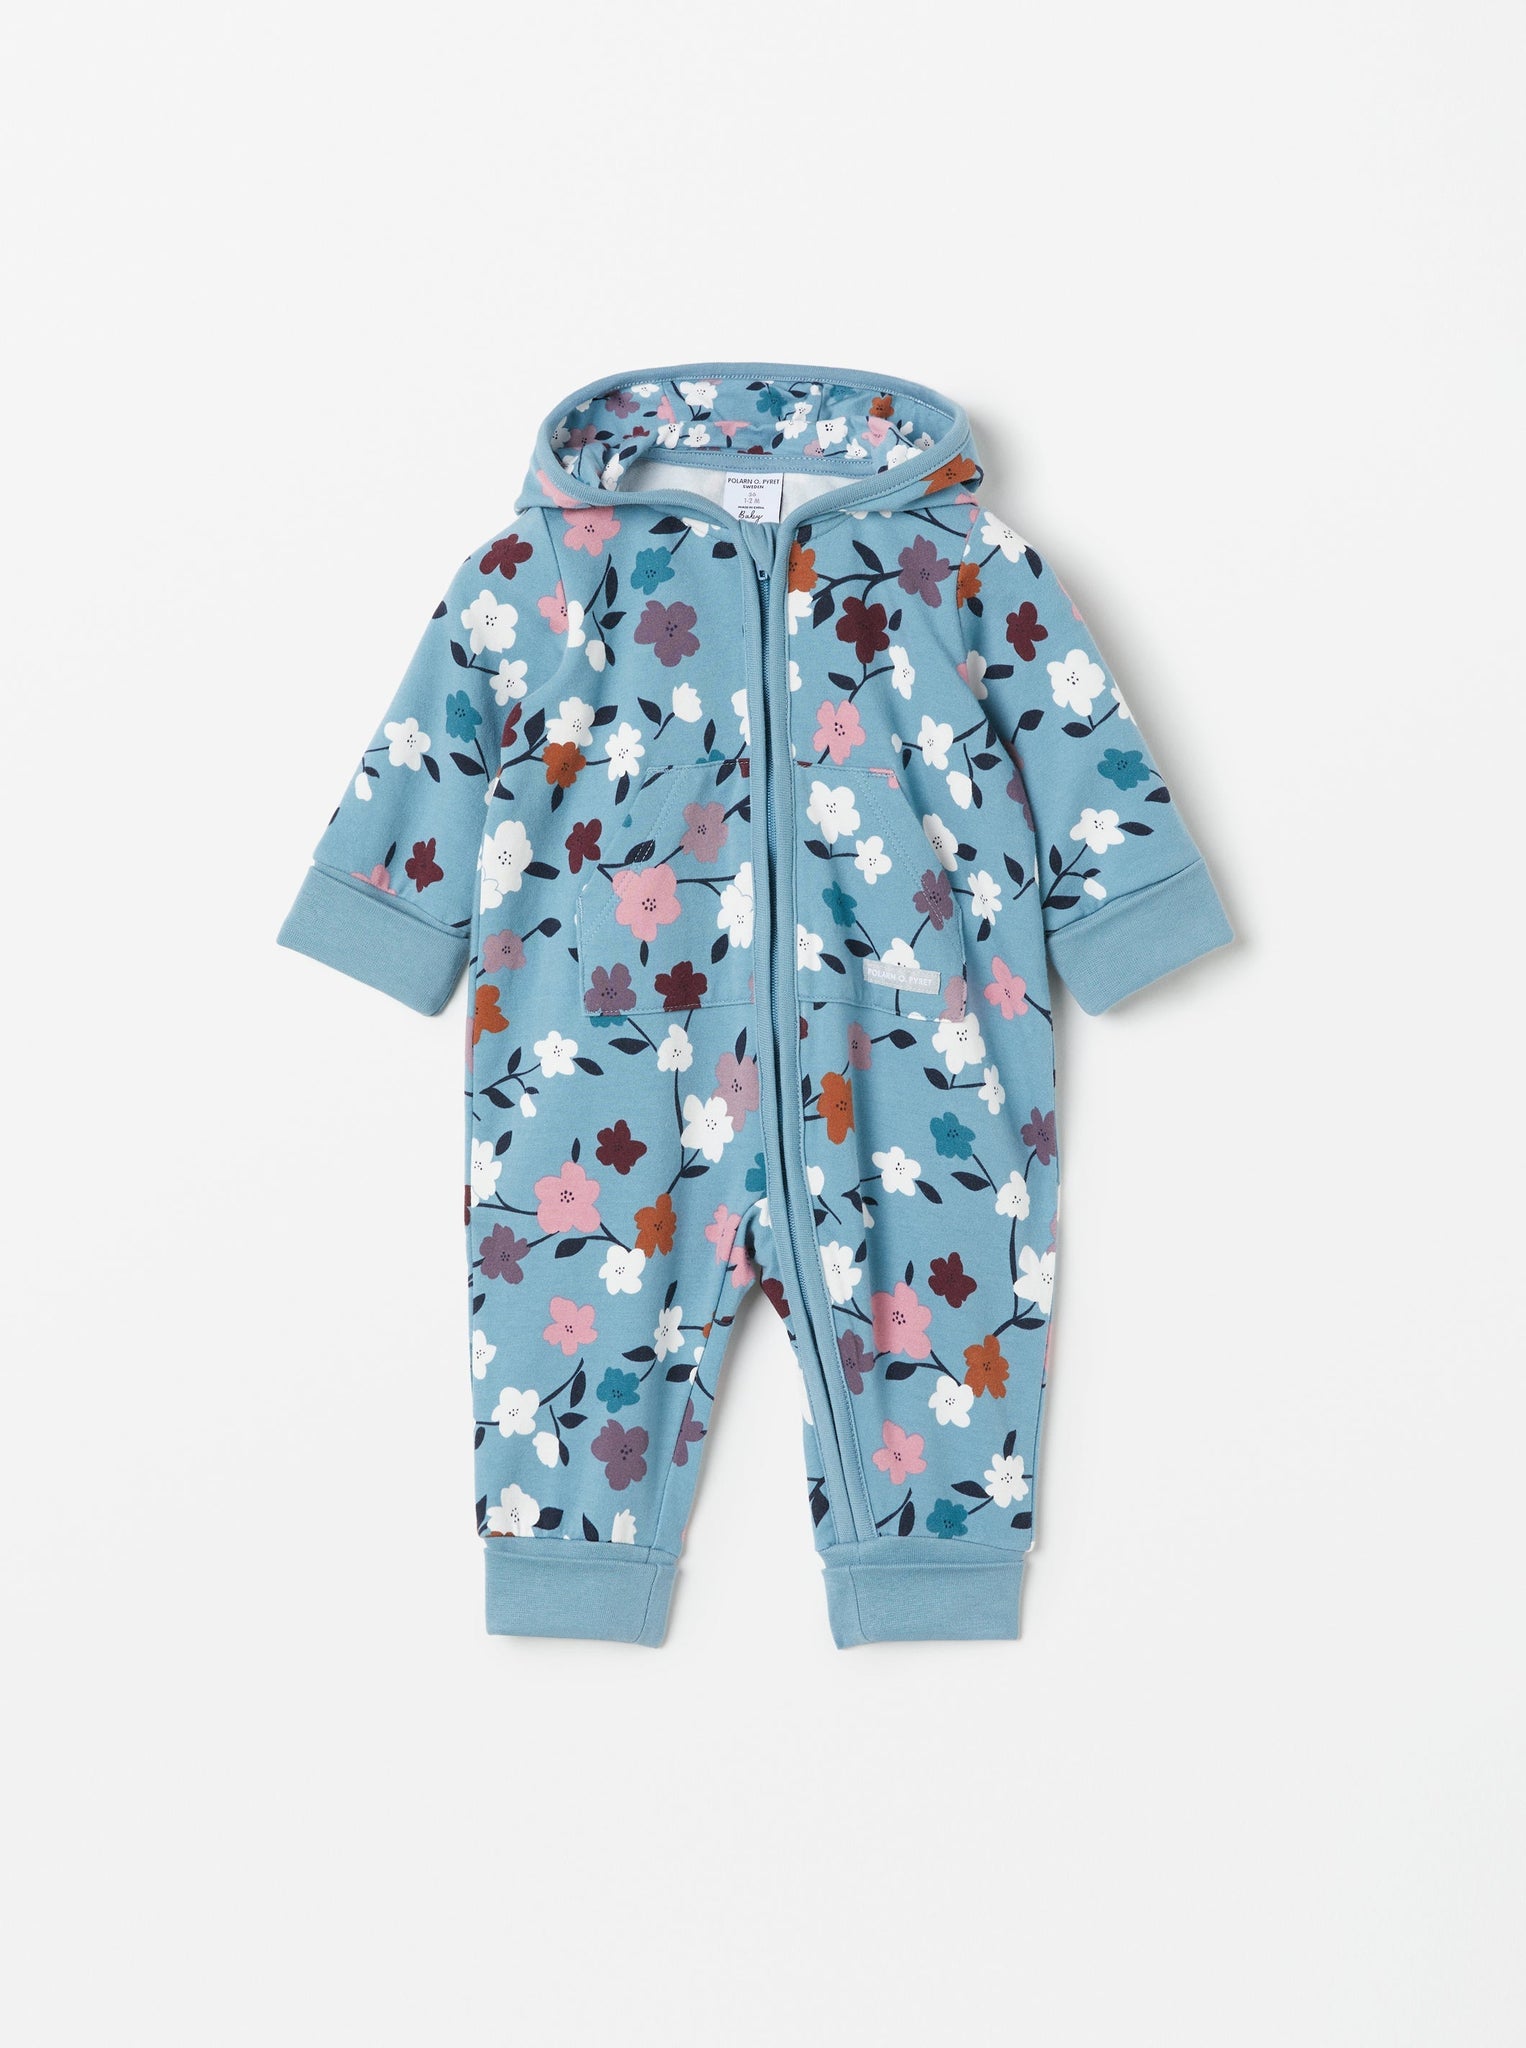 Cotton Floral Blue Baby All-In-One from the Polarn O. Pyret kidswear collection. Ethically produced kids clothing.